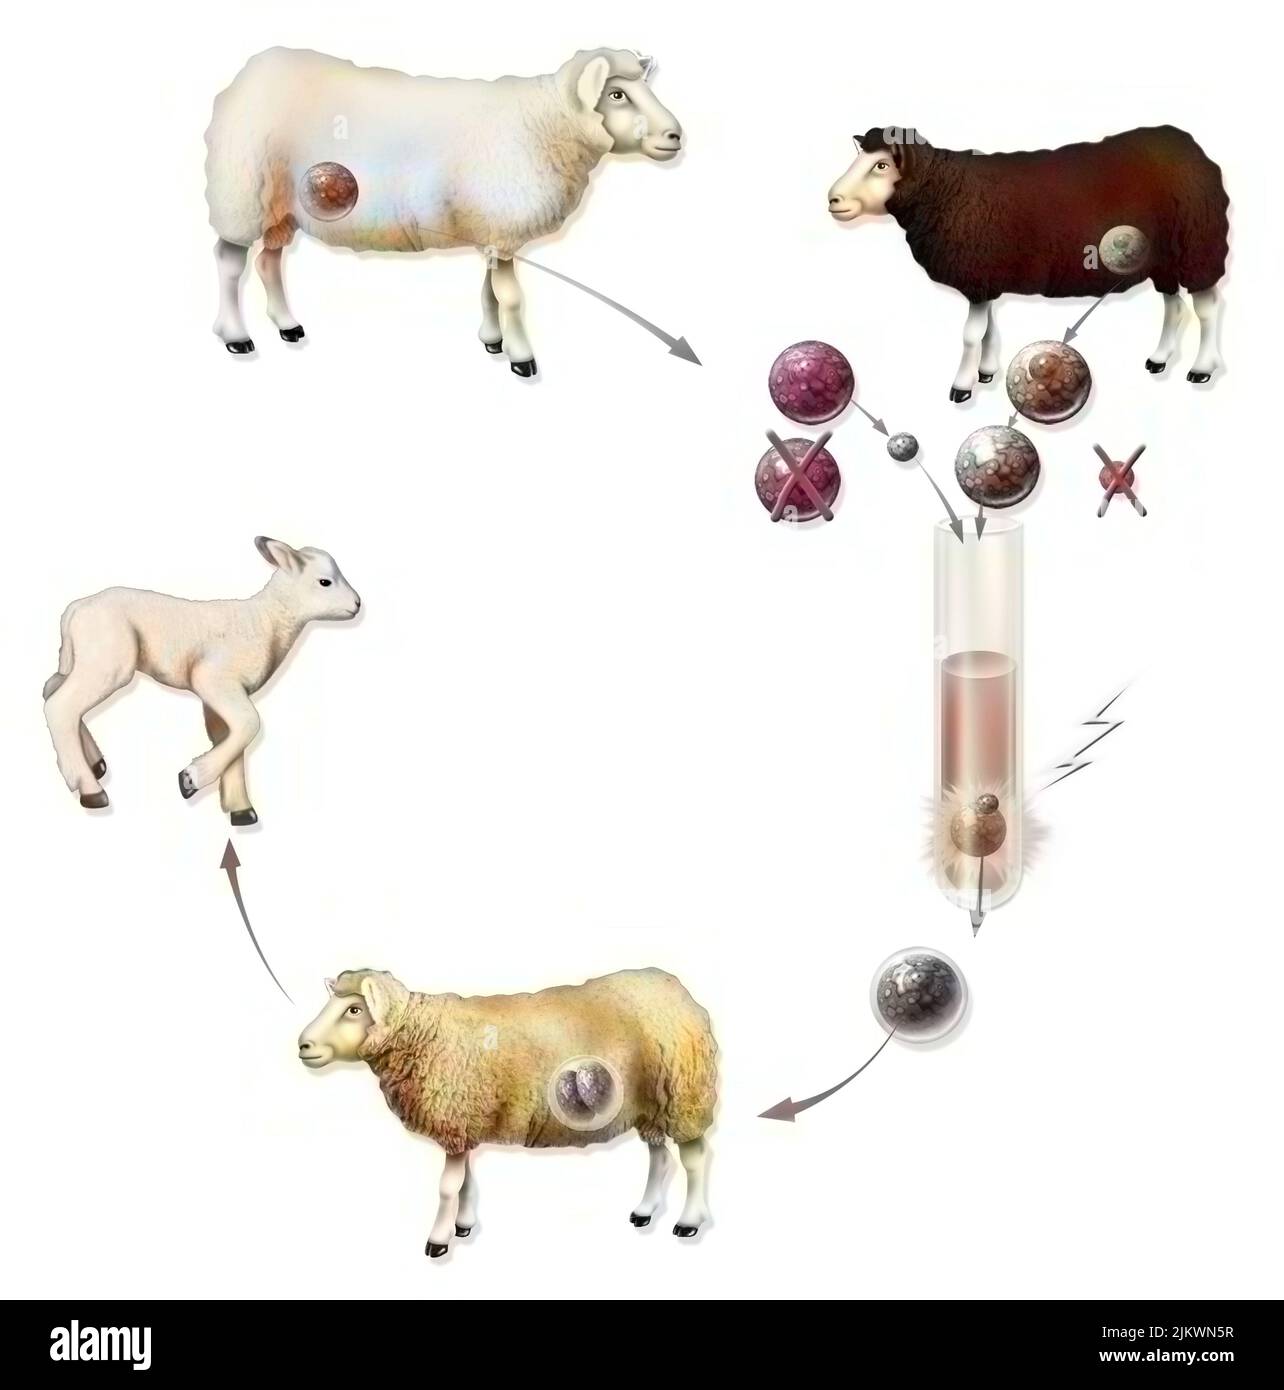 Experiment on the vertical reproductive cloning of a goat (Dolly) Stock Photo